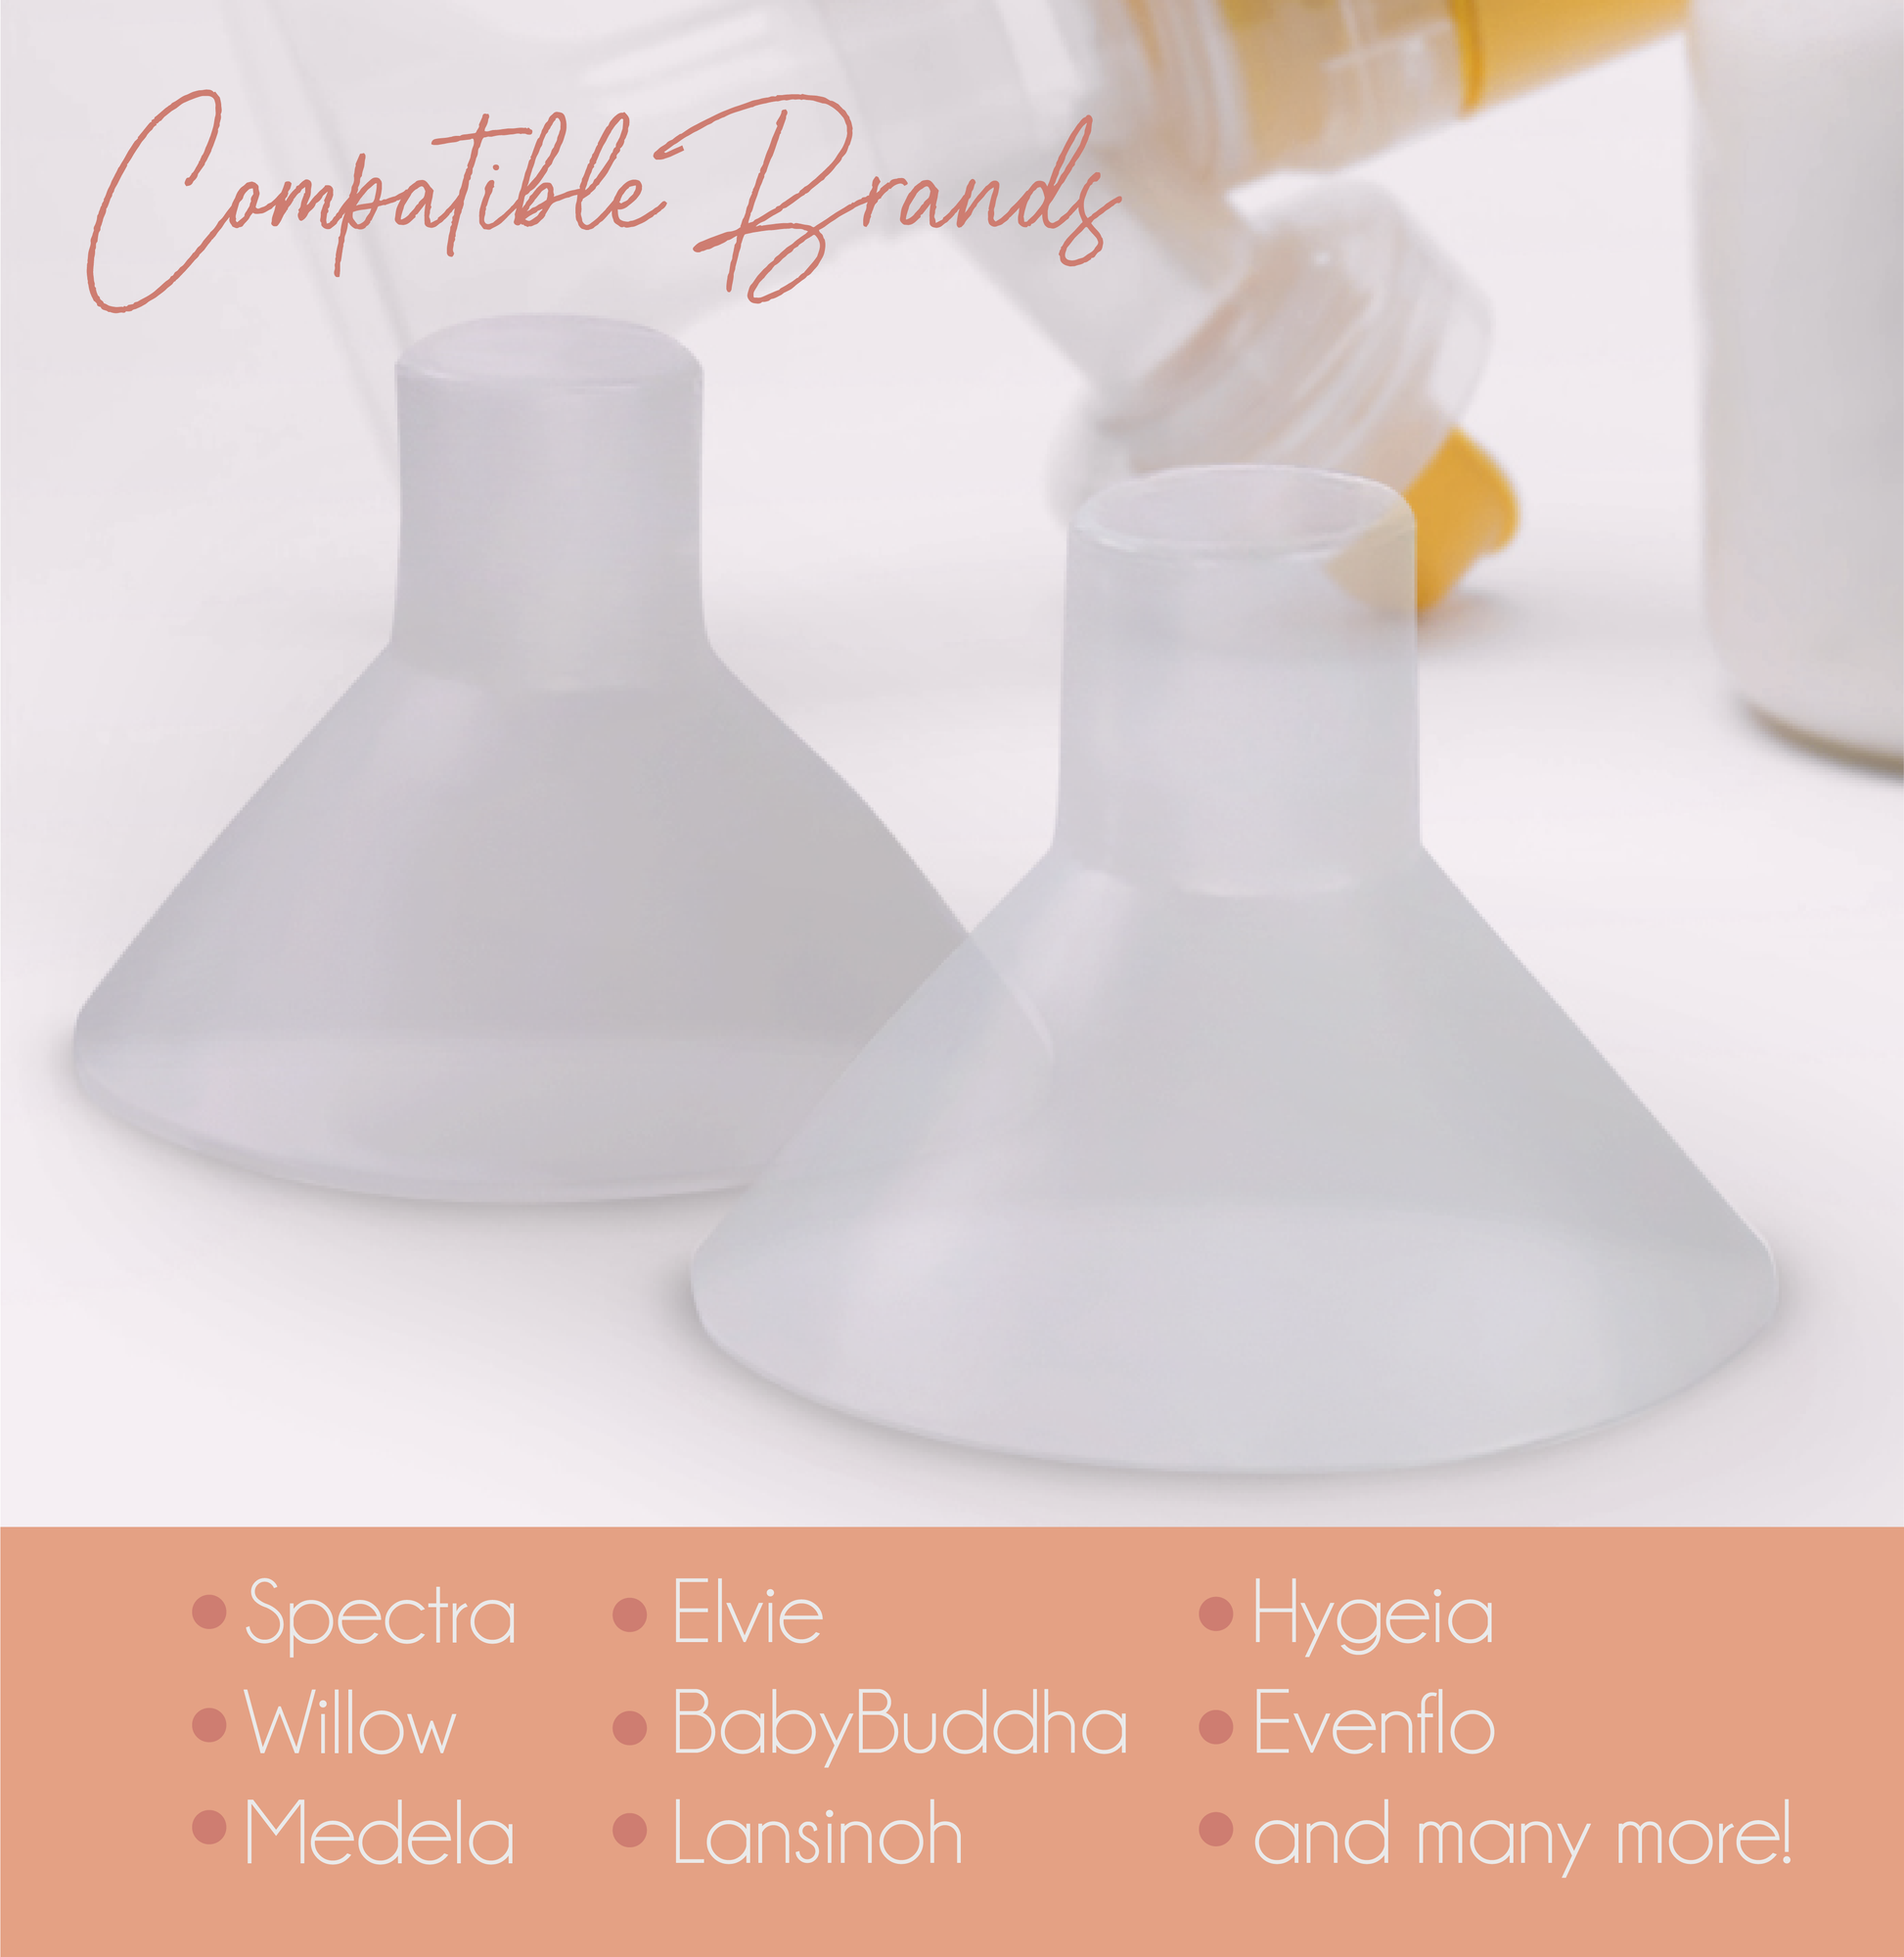 Bundle and save from BeauGen with the Starter Bundle. Get BeauGen Breast Pump Cushions and this convenient carrying tin here! The BeauGen Breast Pump Cushions are compatible with most major pump brands.